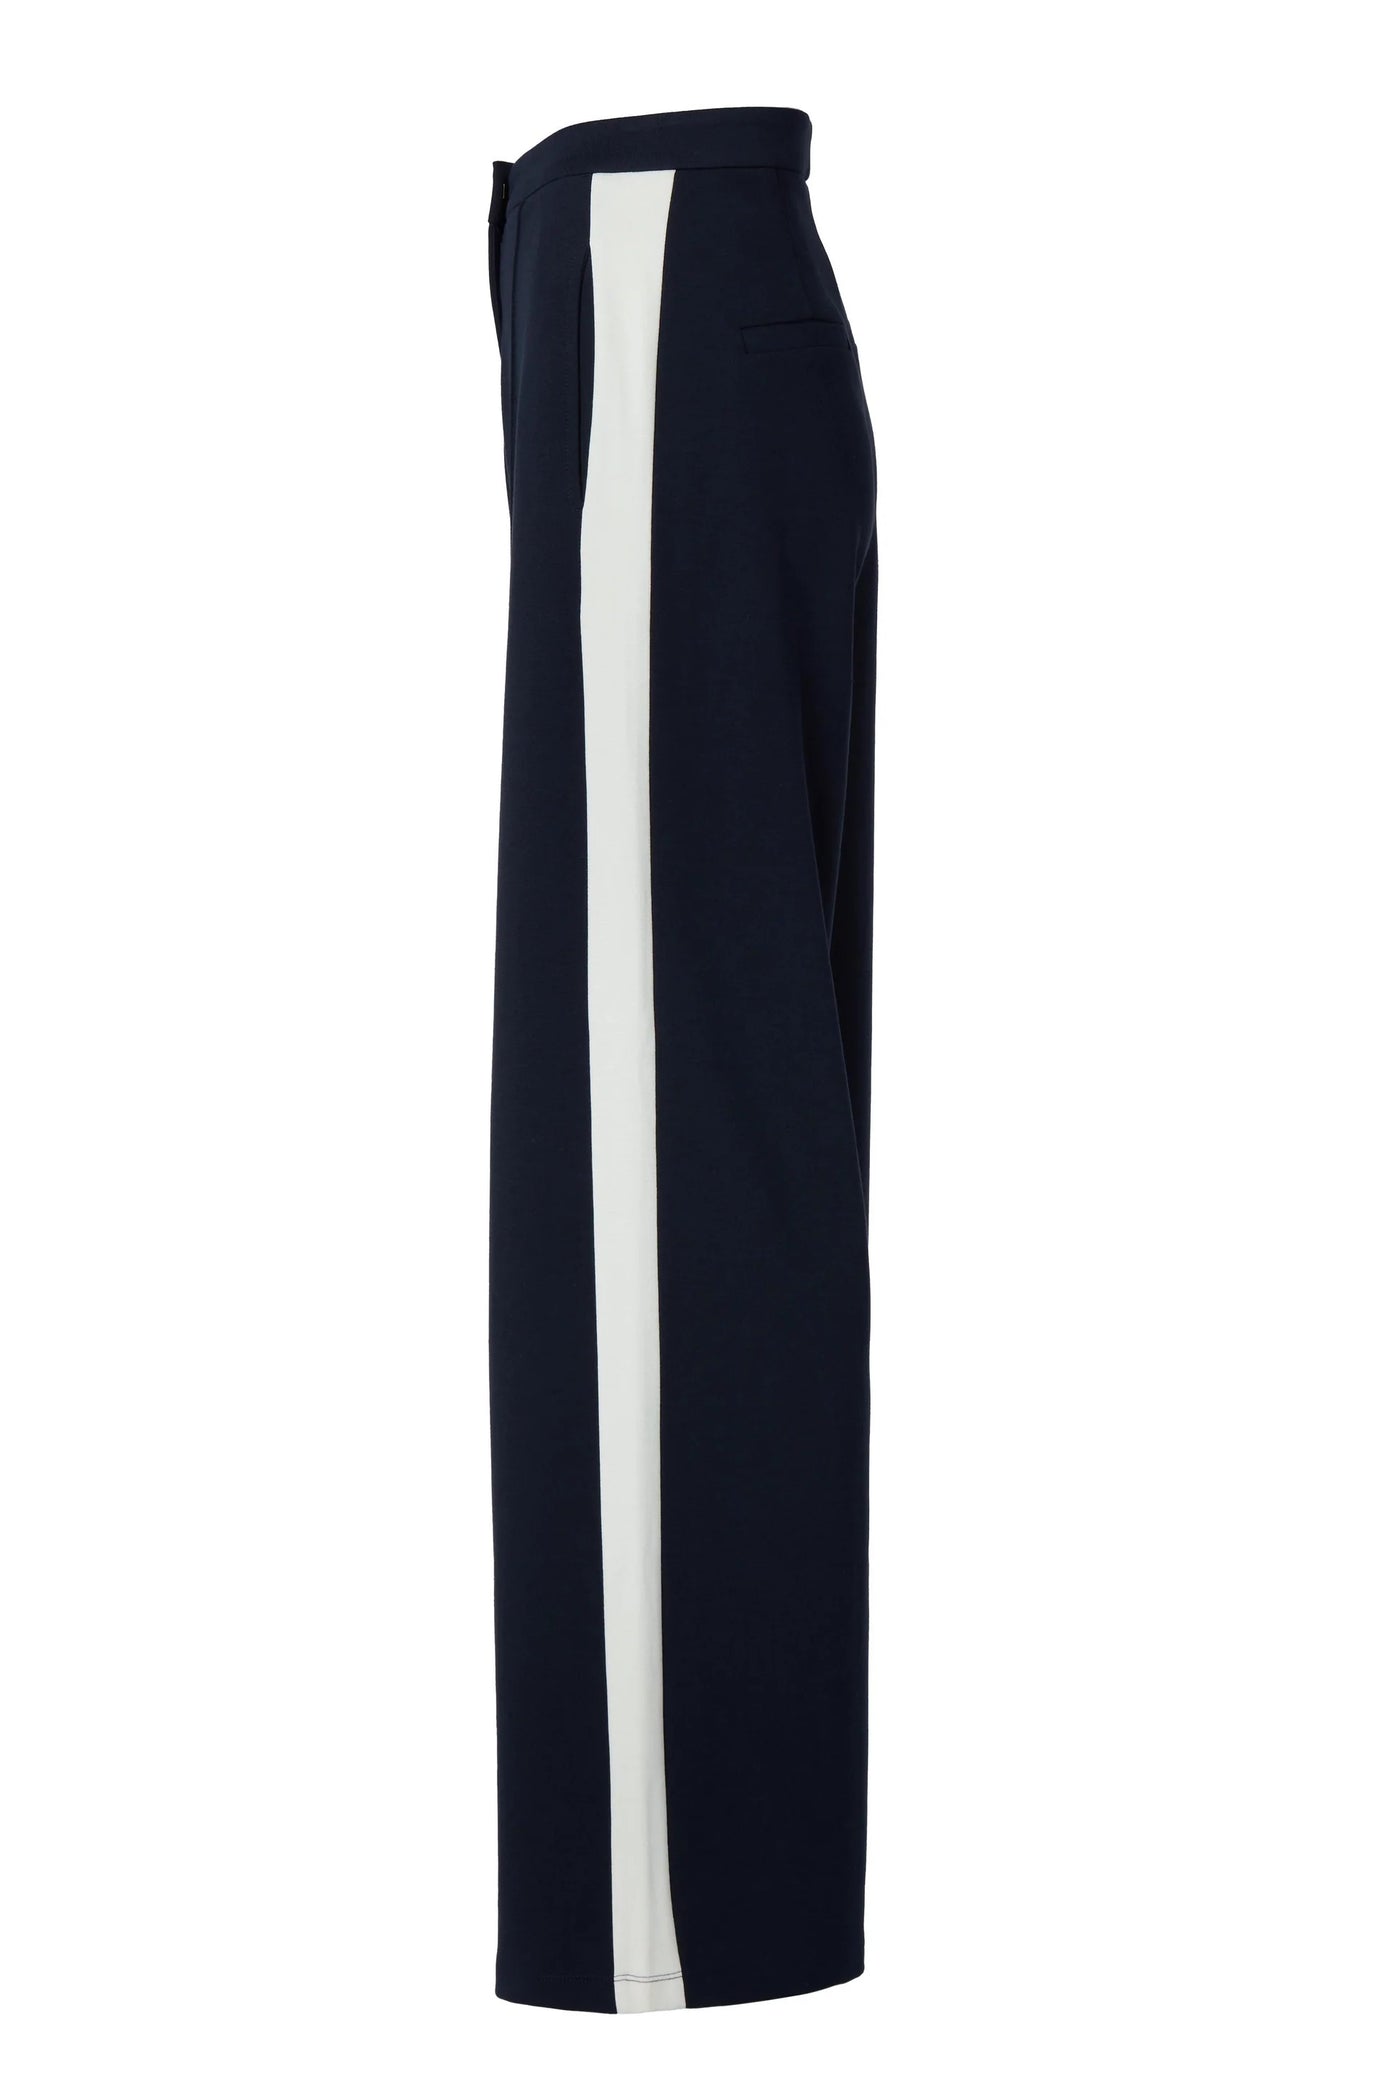 Holland Cooper Wide Leg Pant in Ink Navy Side